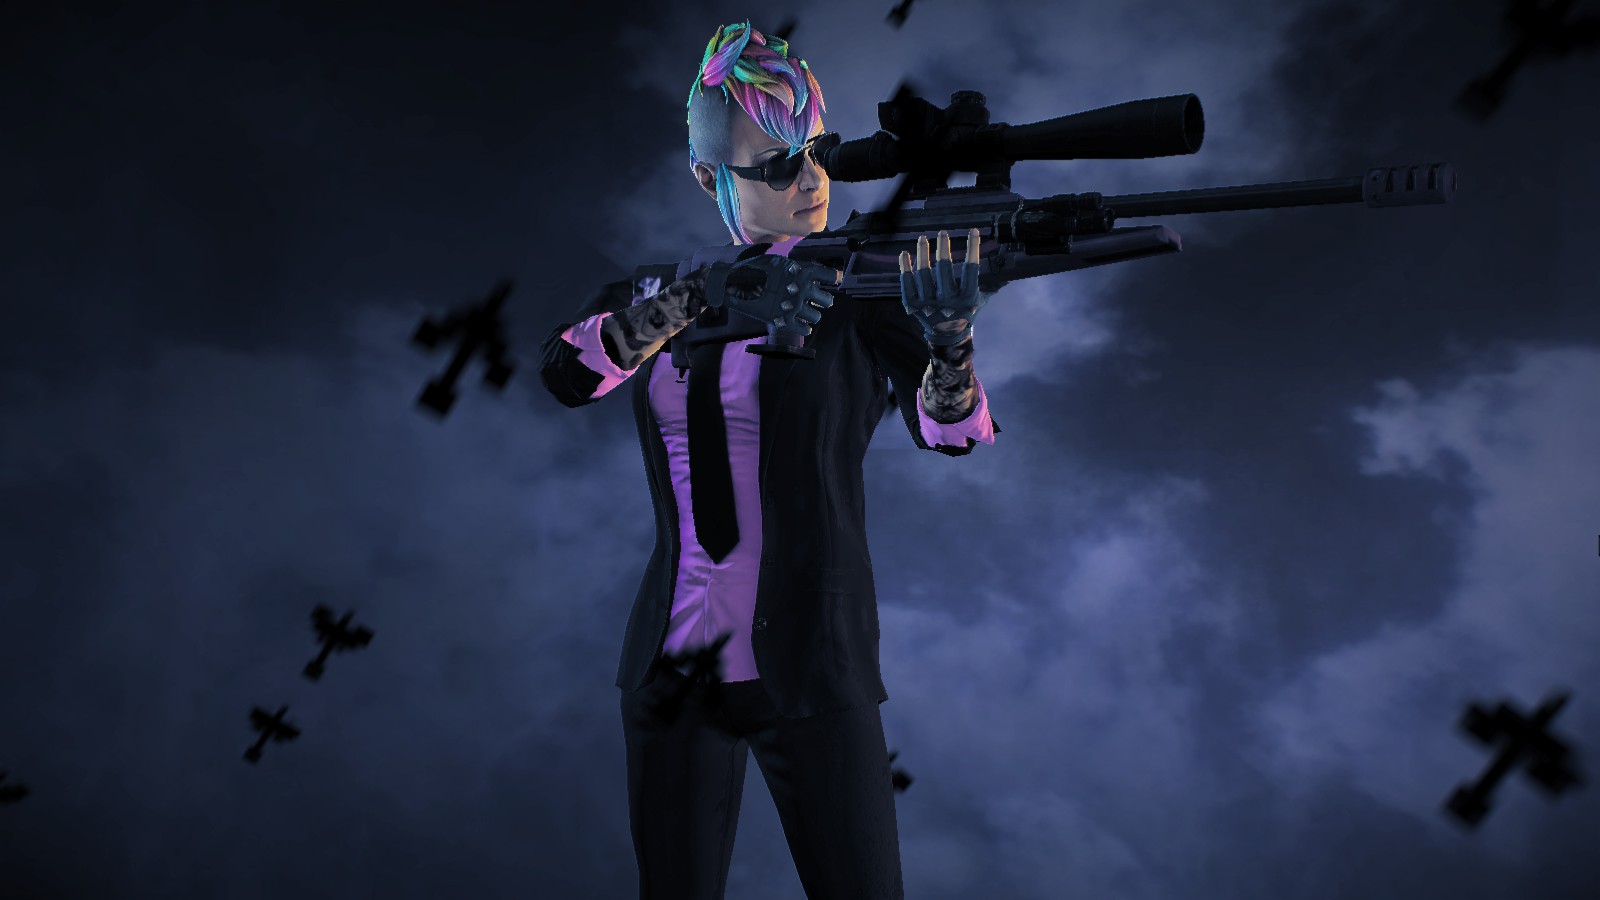 Sydney from payday 2 фото 42